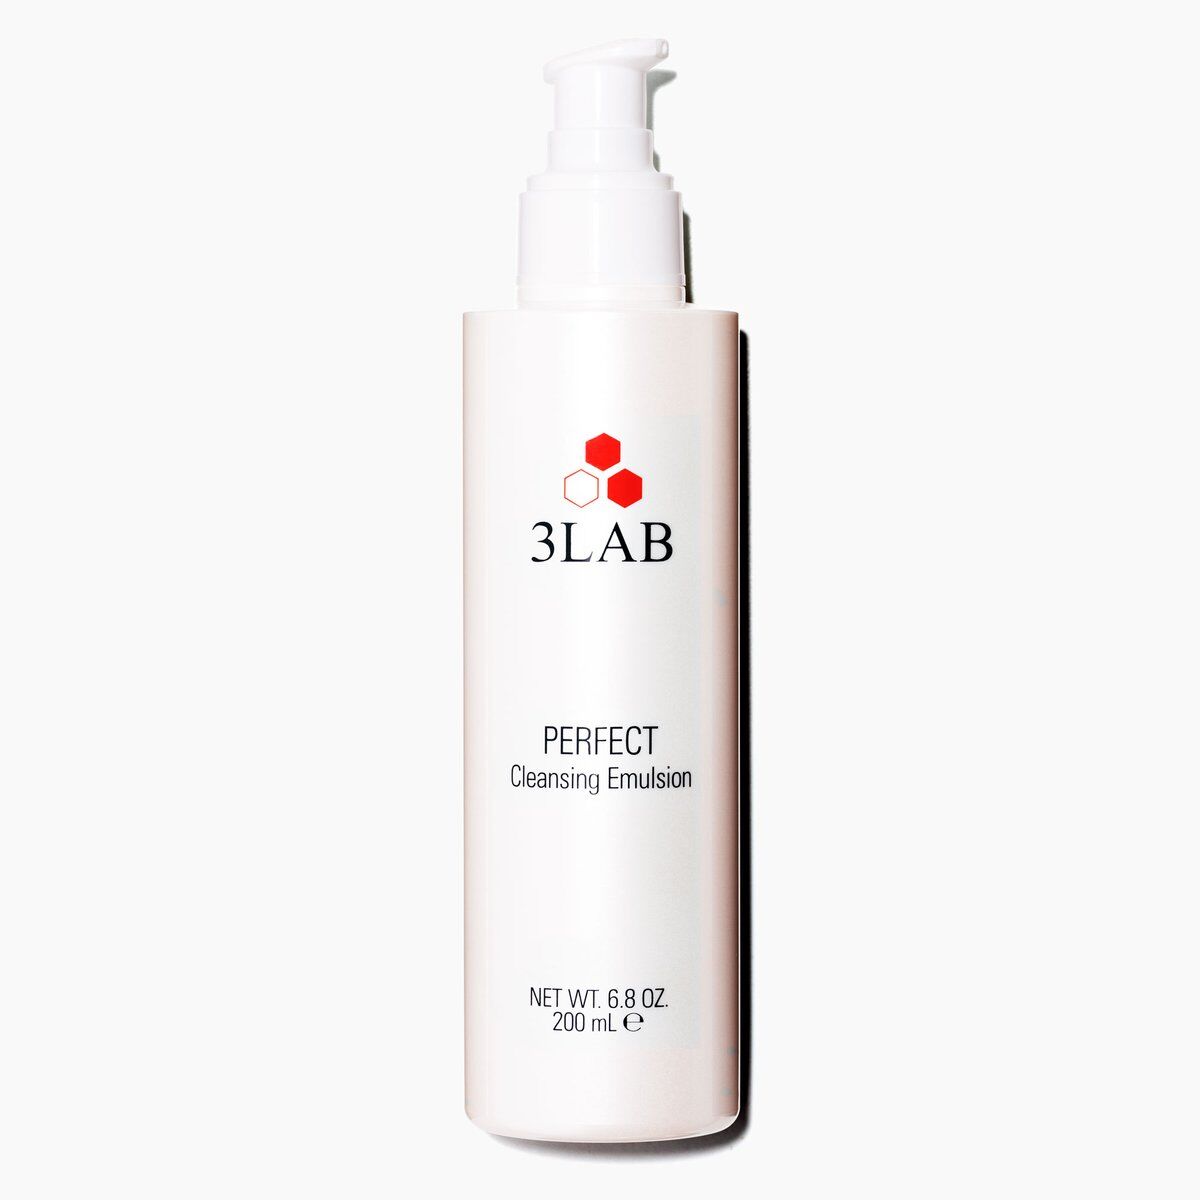 3LAB - Perfect Cleansing Emulsion